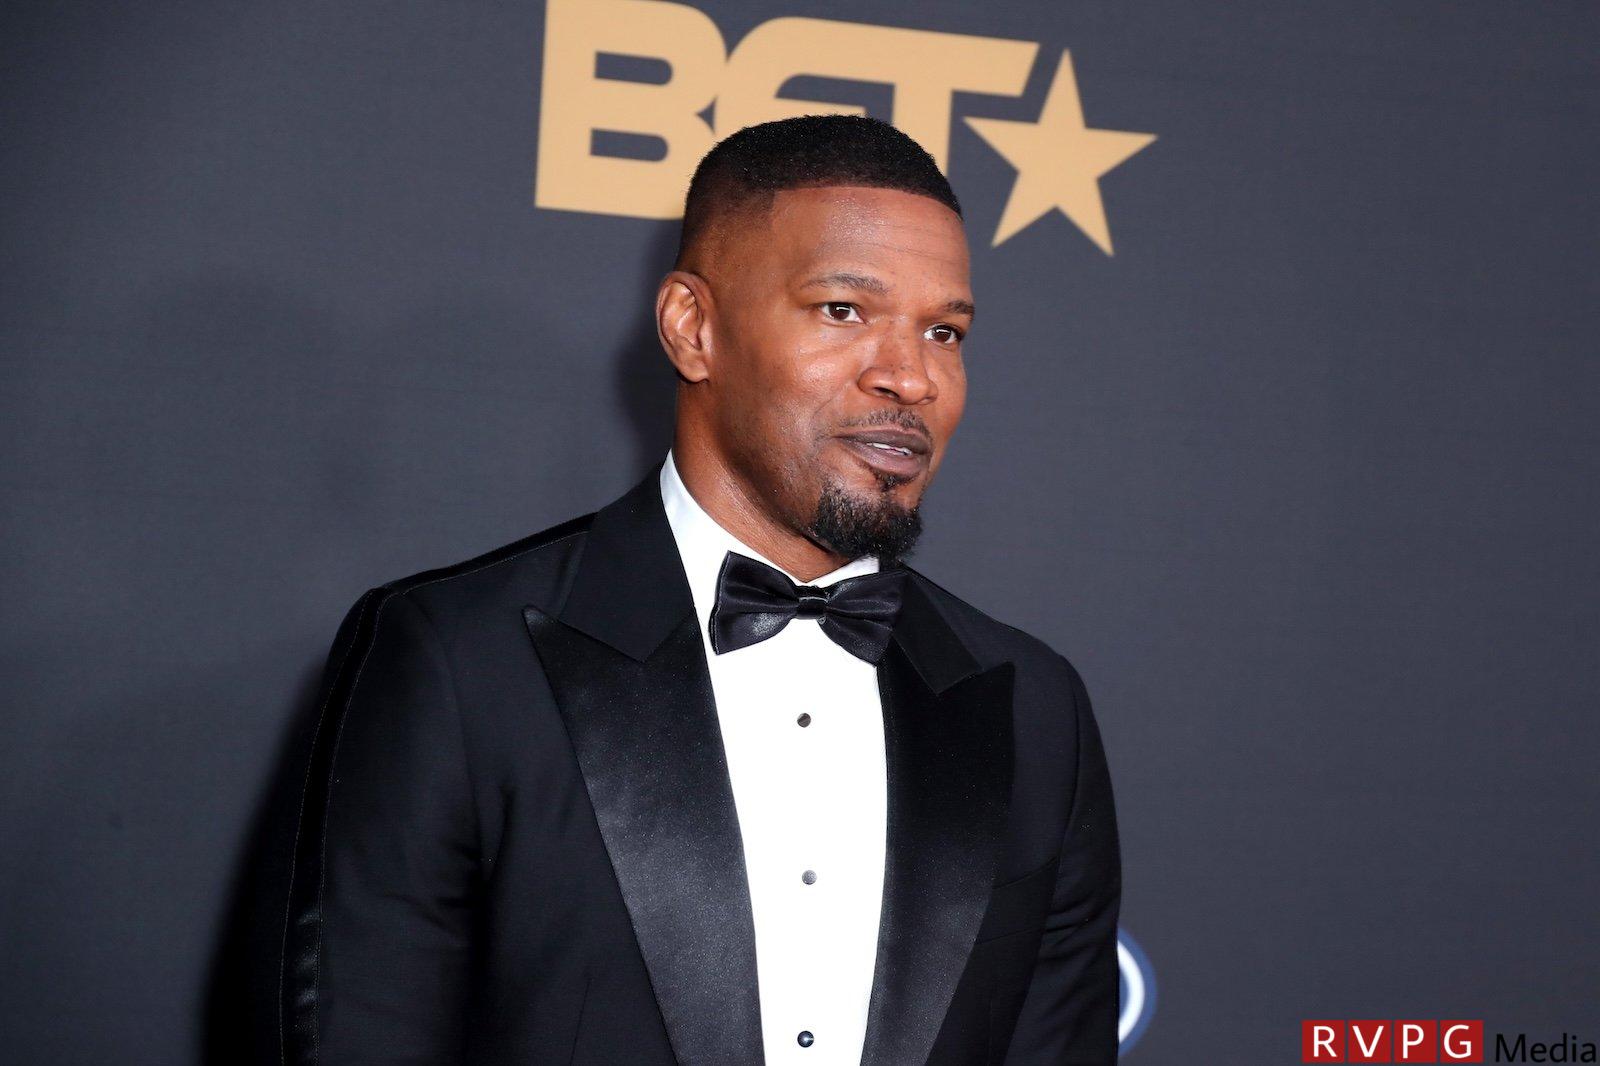 Jamie Foxx Looks Fit & Full of Life In Return To Show After Health Scare : Watch